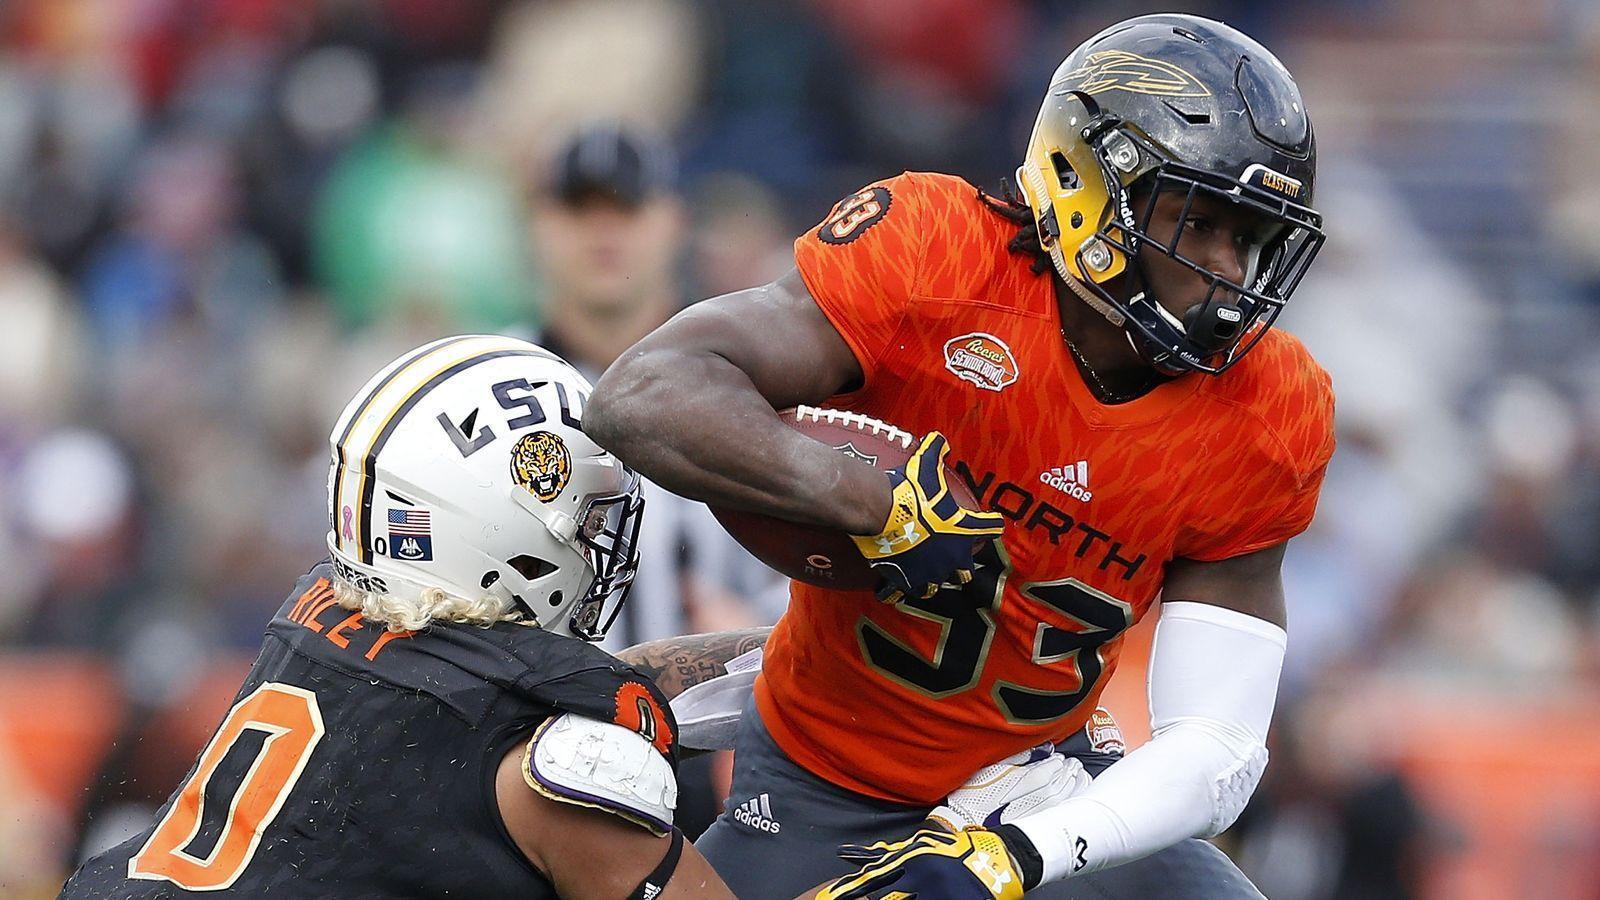 What anonymous scouts said about Chiefs 3rd round pick Kareem Hunt